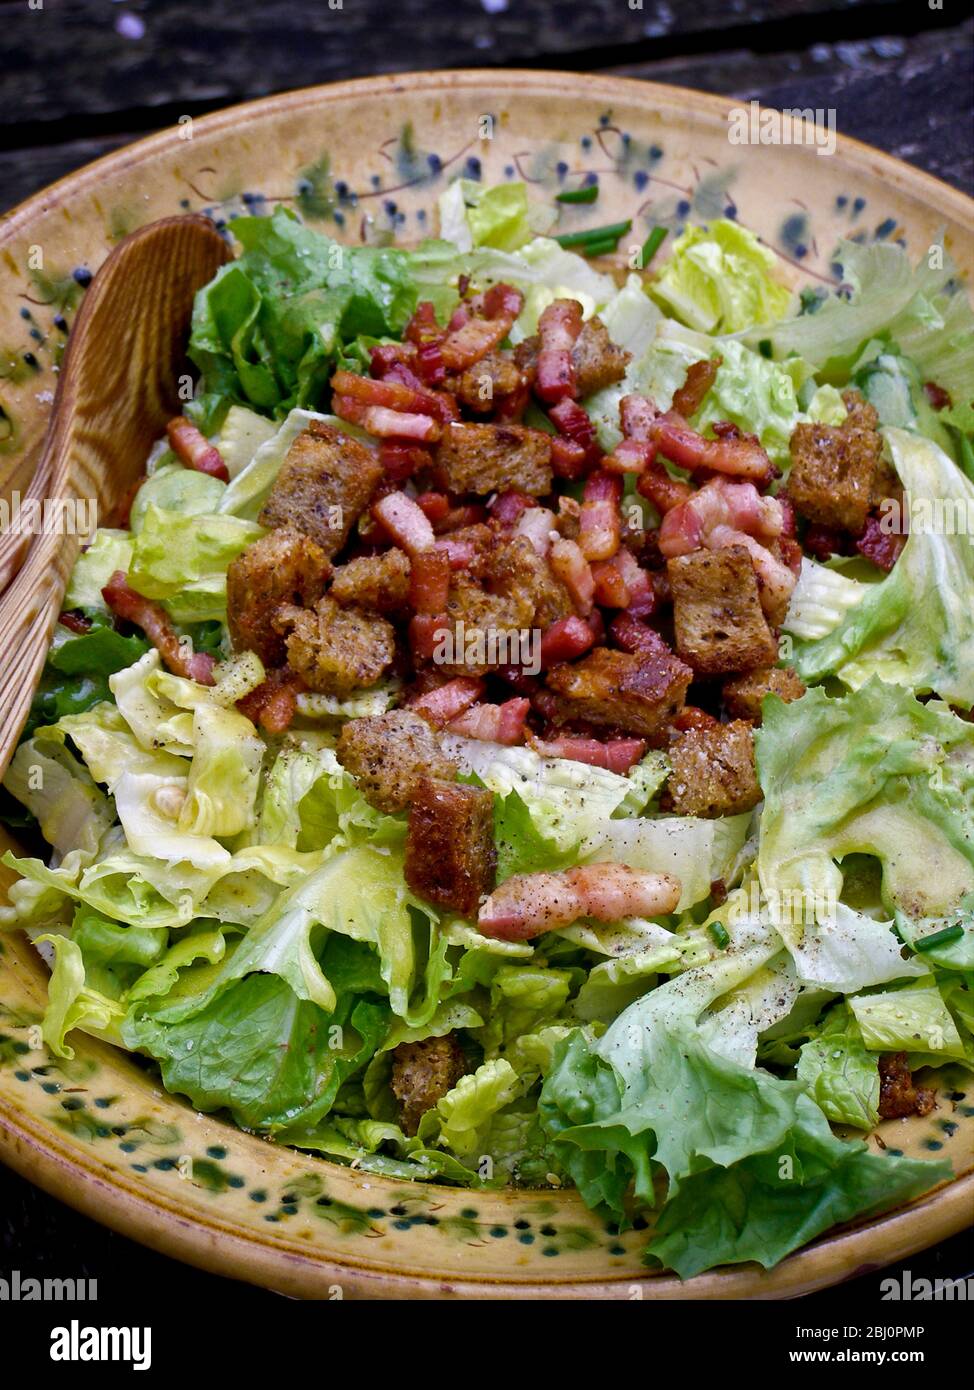 Summer salad outdoors: lettuce - batavia and romaine, whole grain bread croutons,chopped chives, fried pancetta pieces and freshly ground pepper with Stock Photo